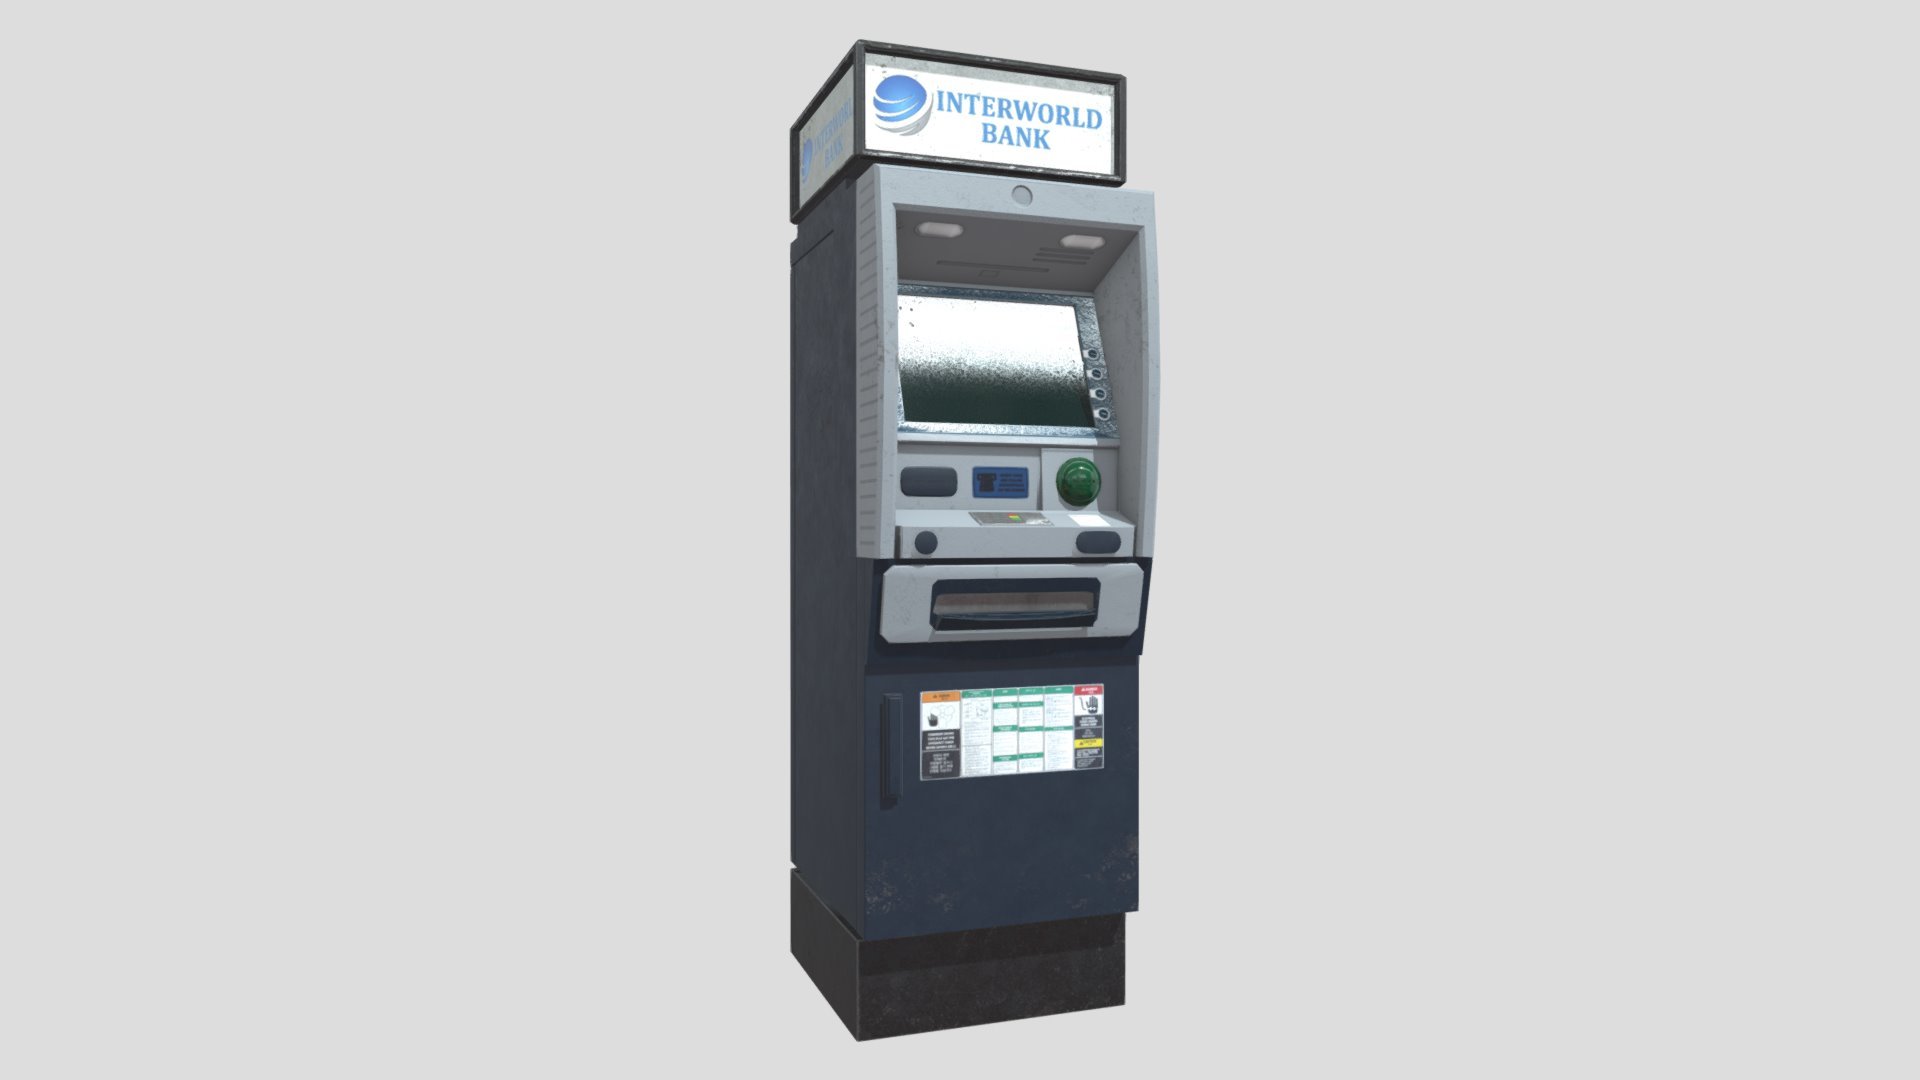 ATM / Bankomat Gameready Model ( AAA Quality ) , has 3 material variations , with everything made from scratch , its optimized and gameready model , includes low poly and high poly versions as well as one LOD , Unreal Engine Content Folder included ( 4.19 , 4.20 , 4.21 , 4.22 ,4.23 versions ) , and Unreal Engine / Unity / Vray / Arnold / Keyshot textures included with jpeg , png , targa and exr extensions , textures are 4K so you will be able to reduce it if you will need , includes fbx , obj , uasset files , great asset for your environments - ATM / Bankomat Gameready Model - 3D model by oguzhnkr 3d model